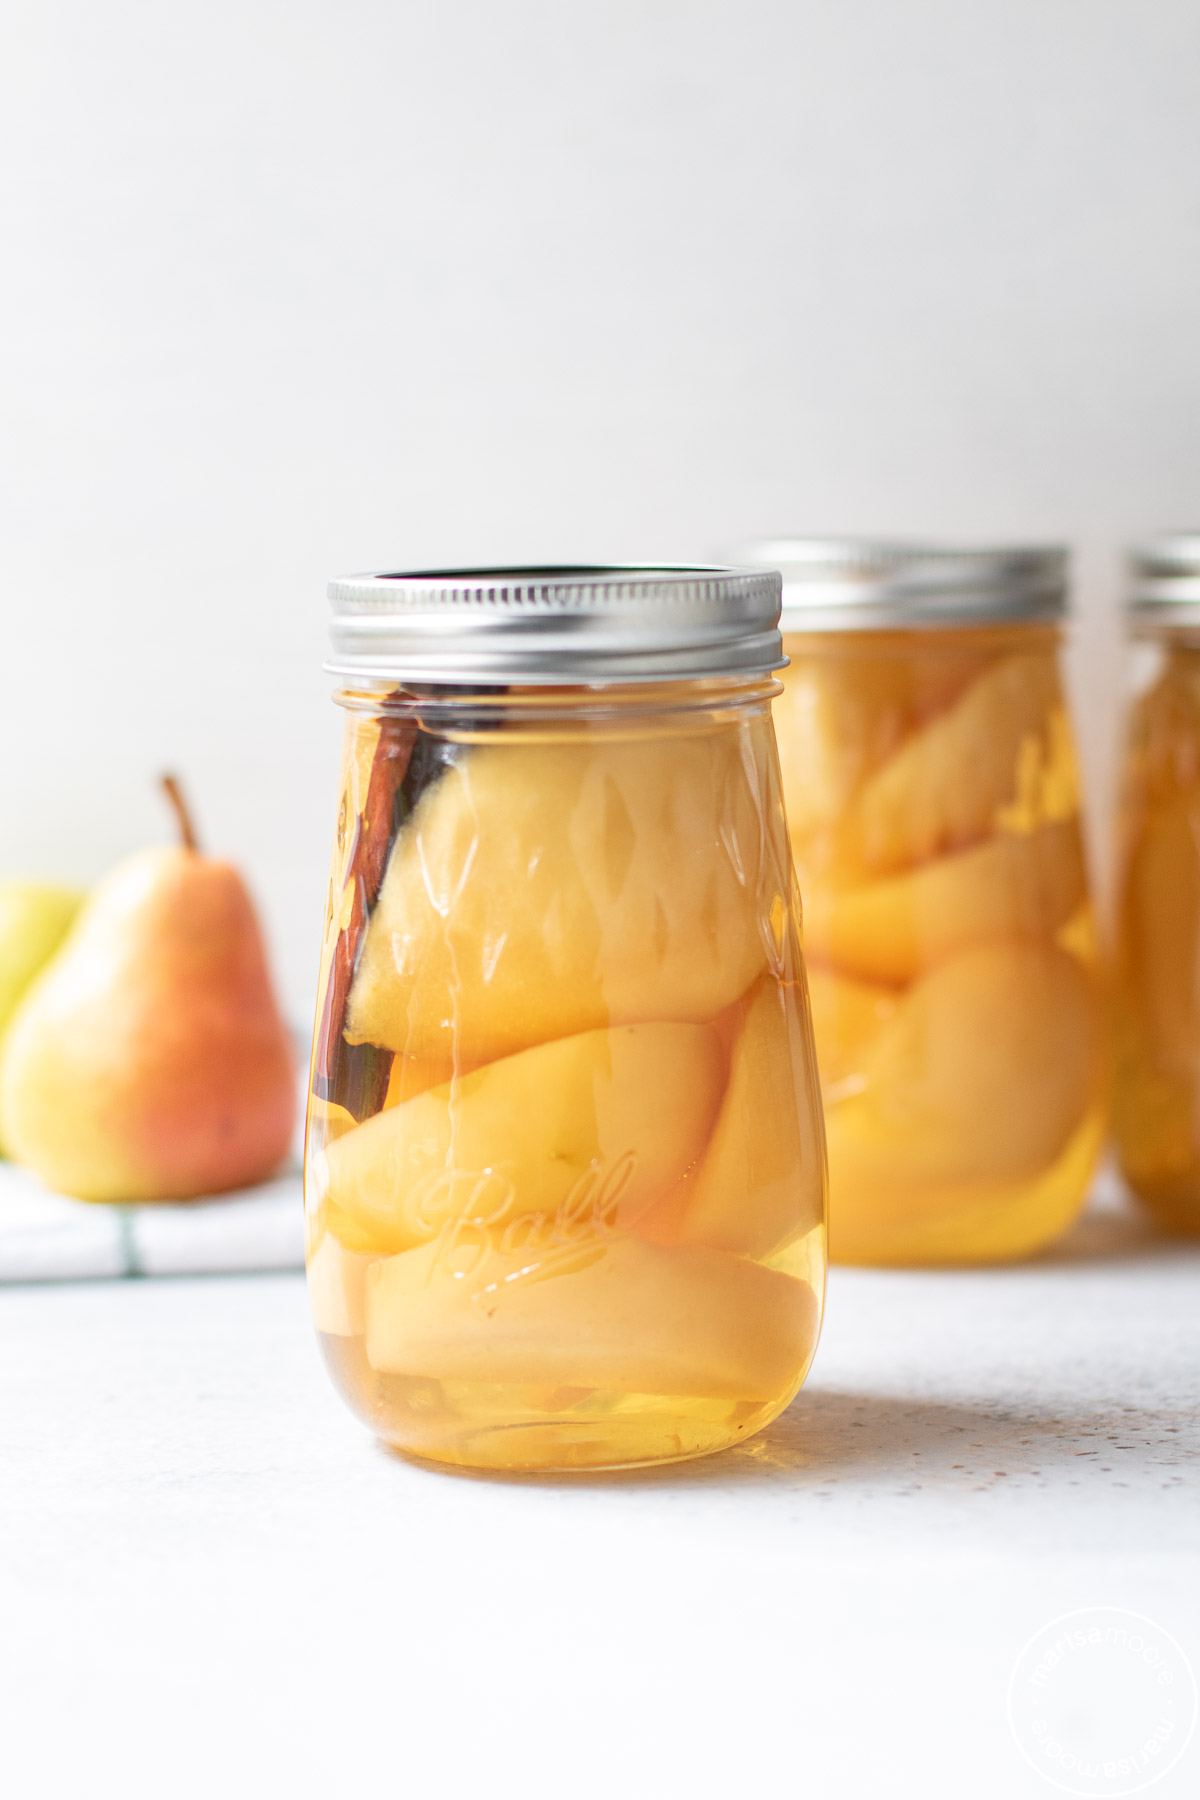 pears in flute shaped jars with a fresh pear in background